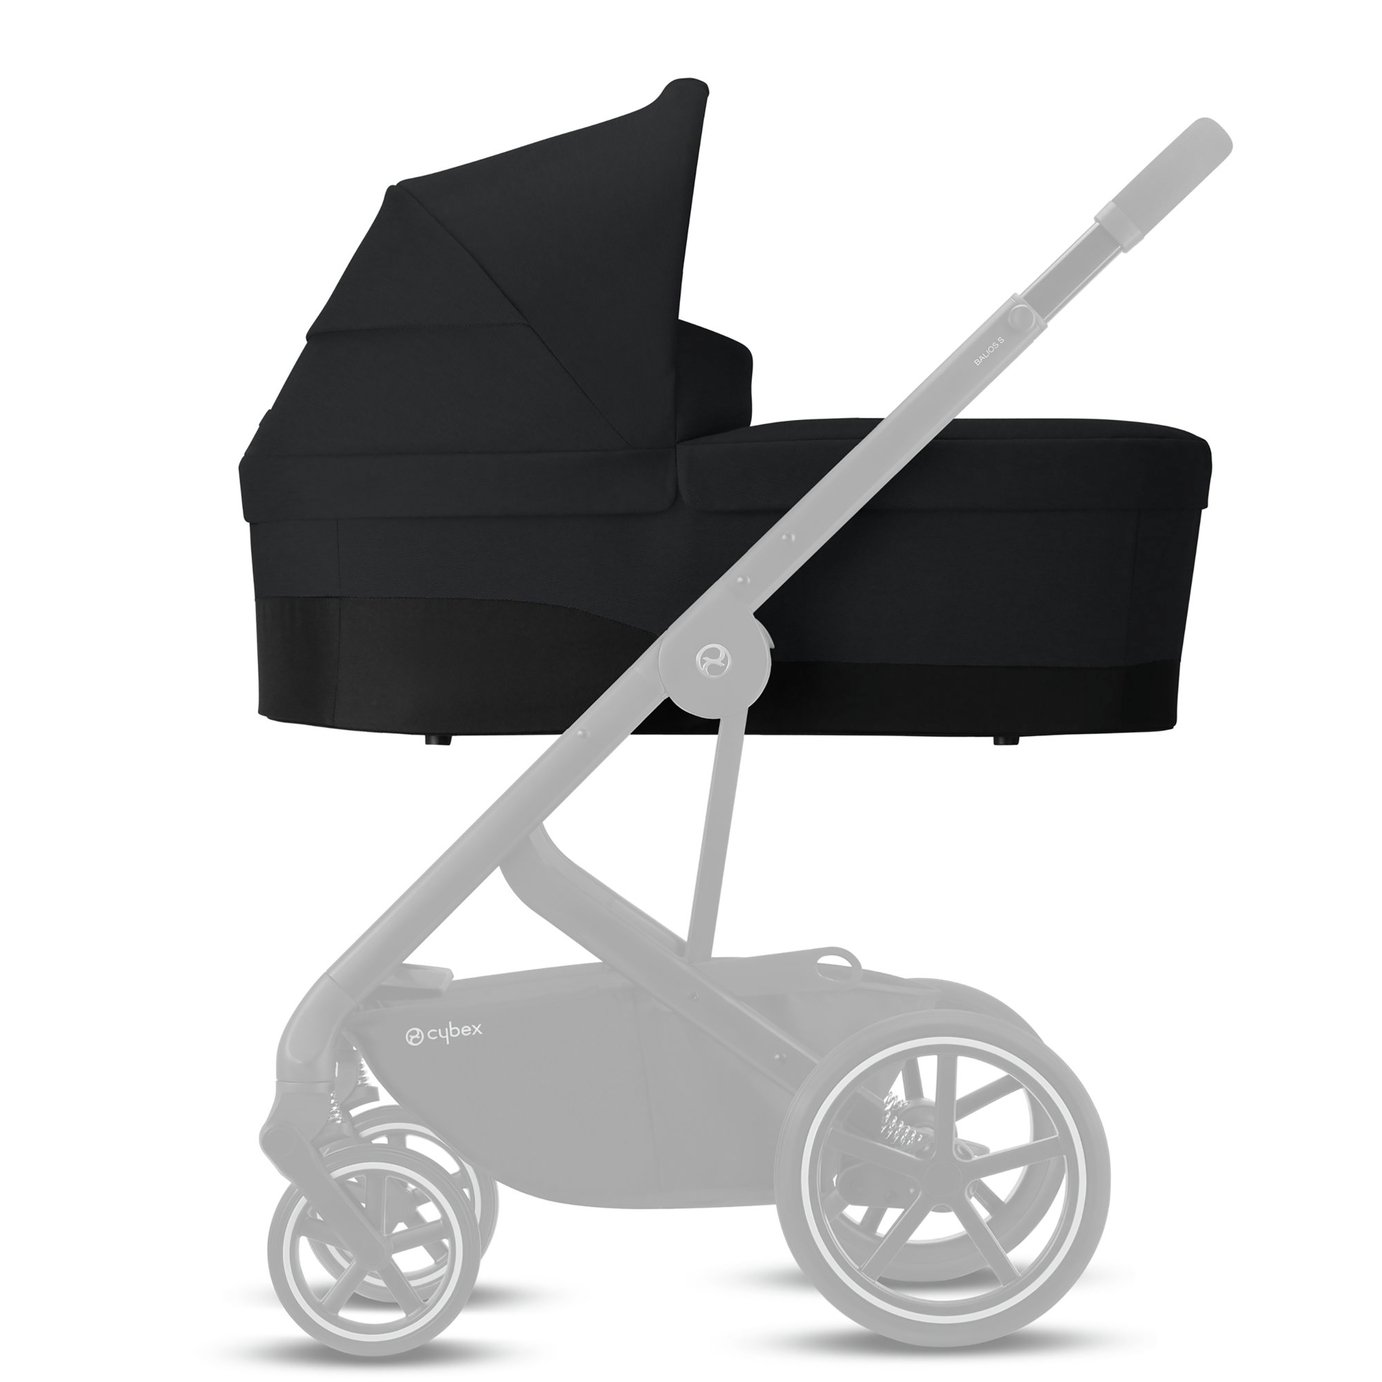 Cybex Balios Carrycot Review